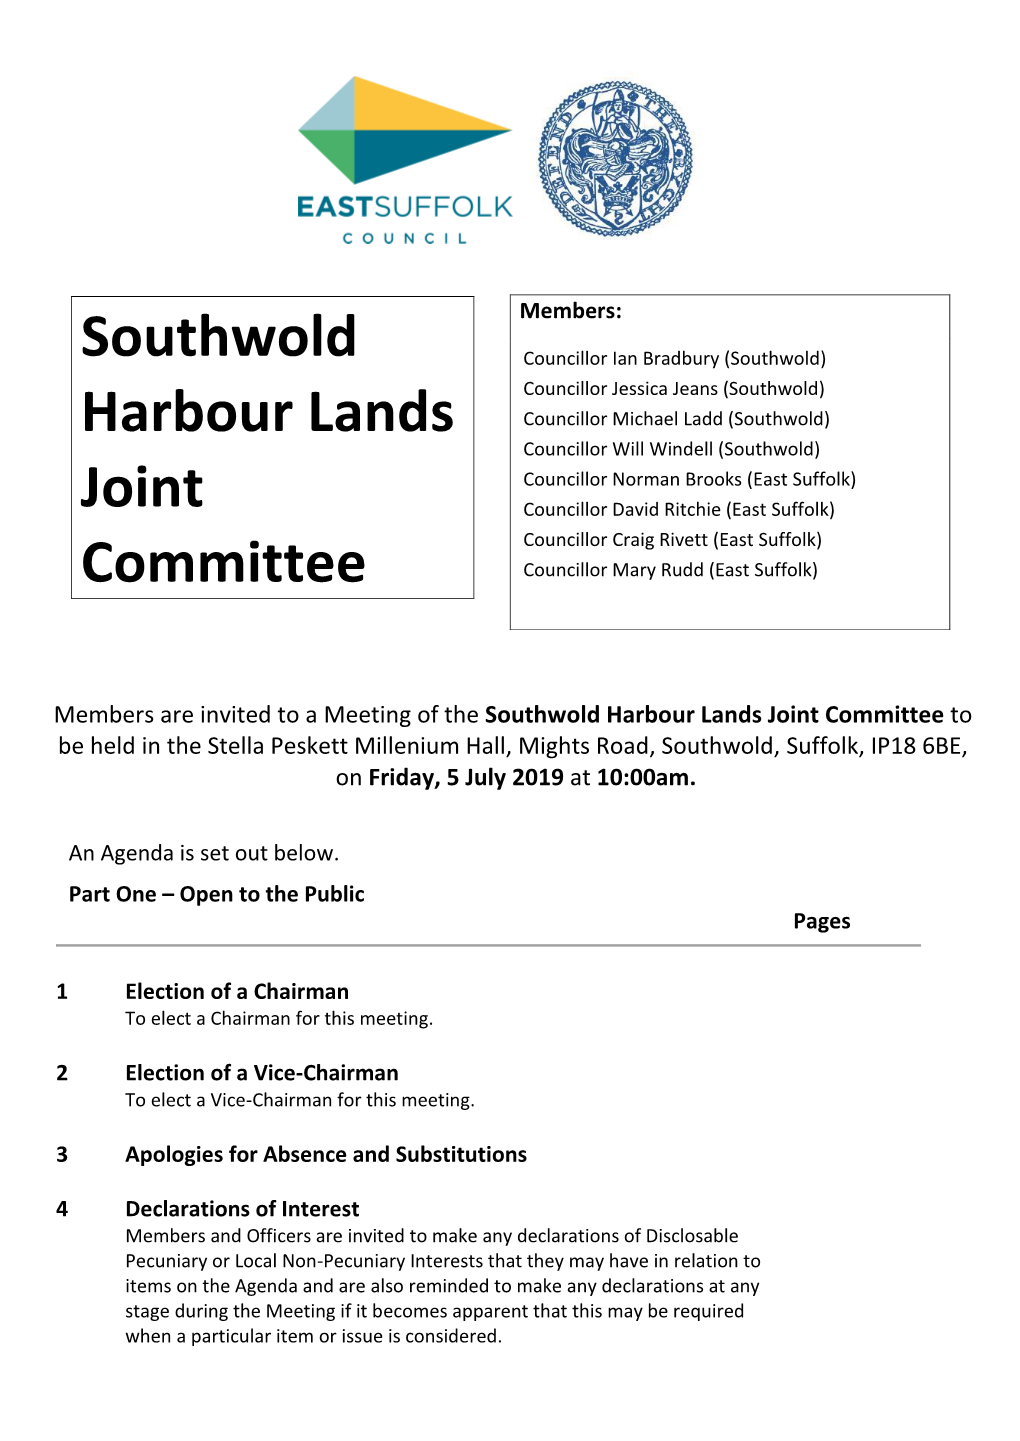 Southwold Harbour Lands Joint Committee to Be Held in the Stella Peskett Millenium Hall, Mights Road, Southwold, Suffolk, IP18 6BE, on Friday, 5 July 2019 at 10:00Am